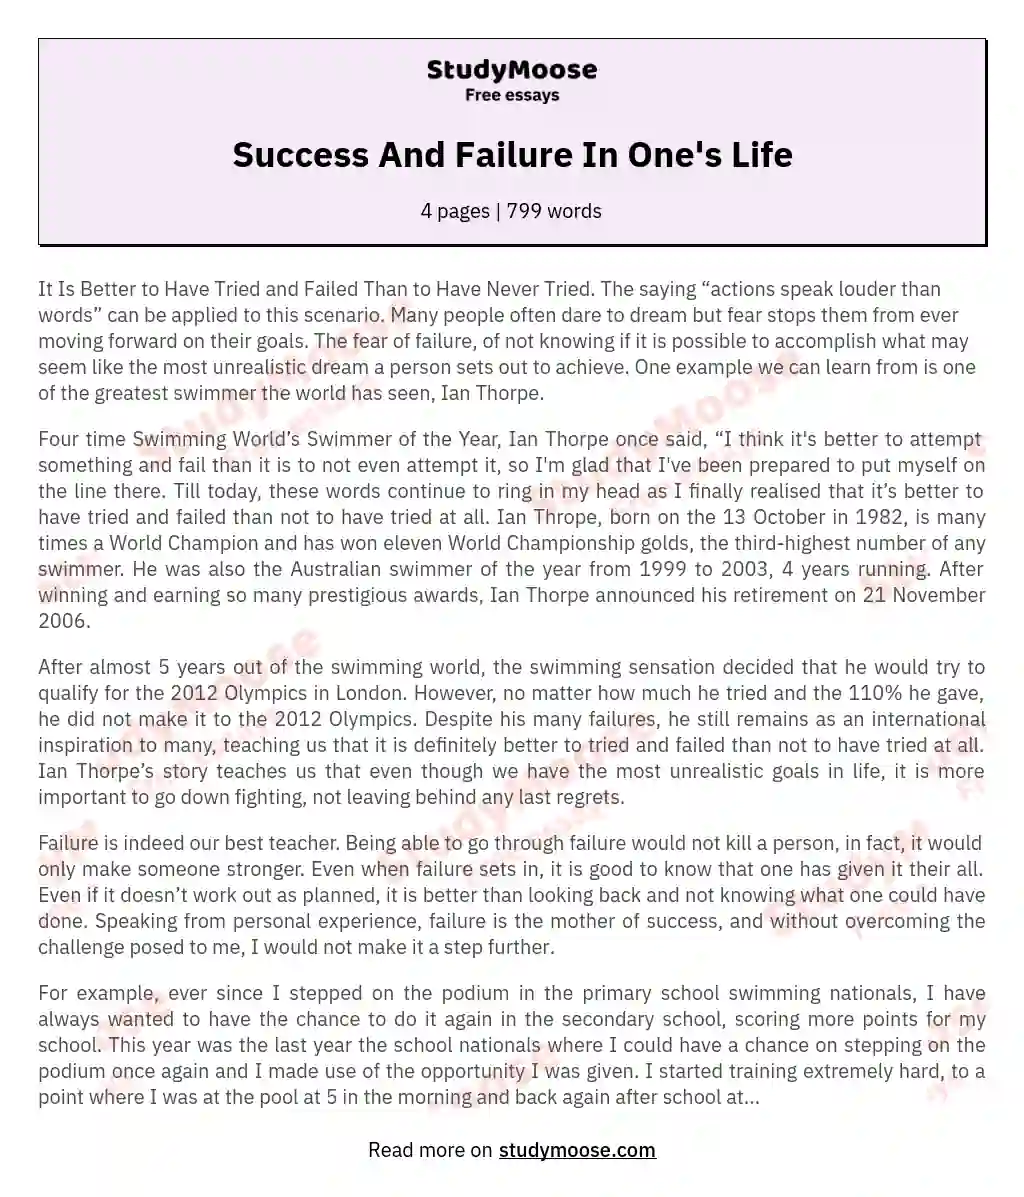 Success And Failure In One's Life essay